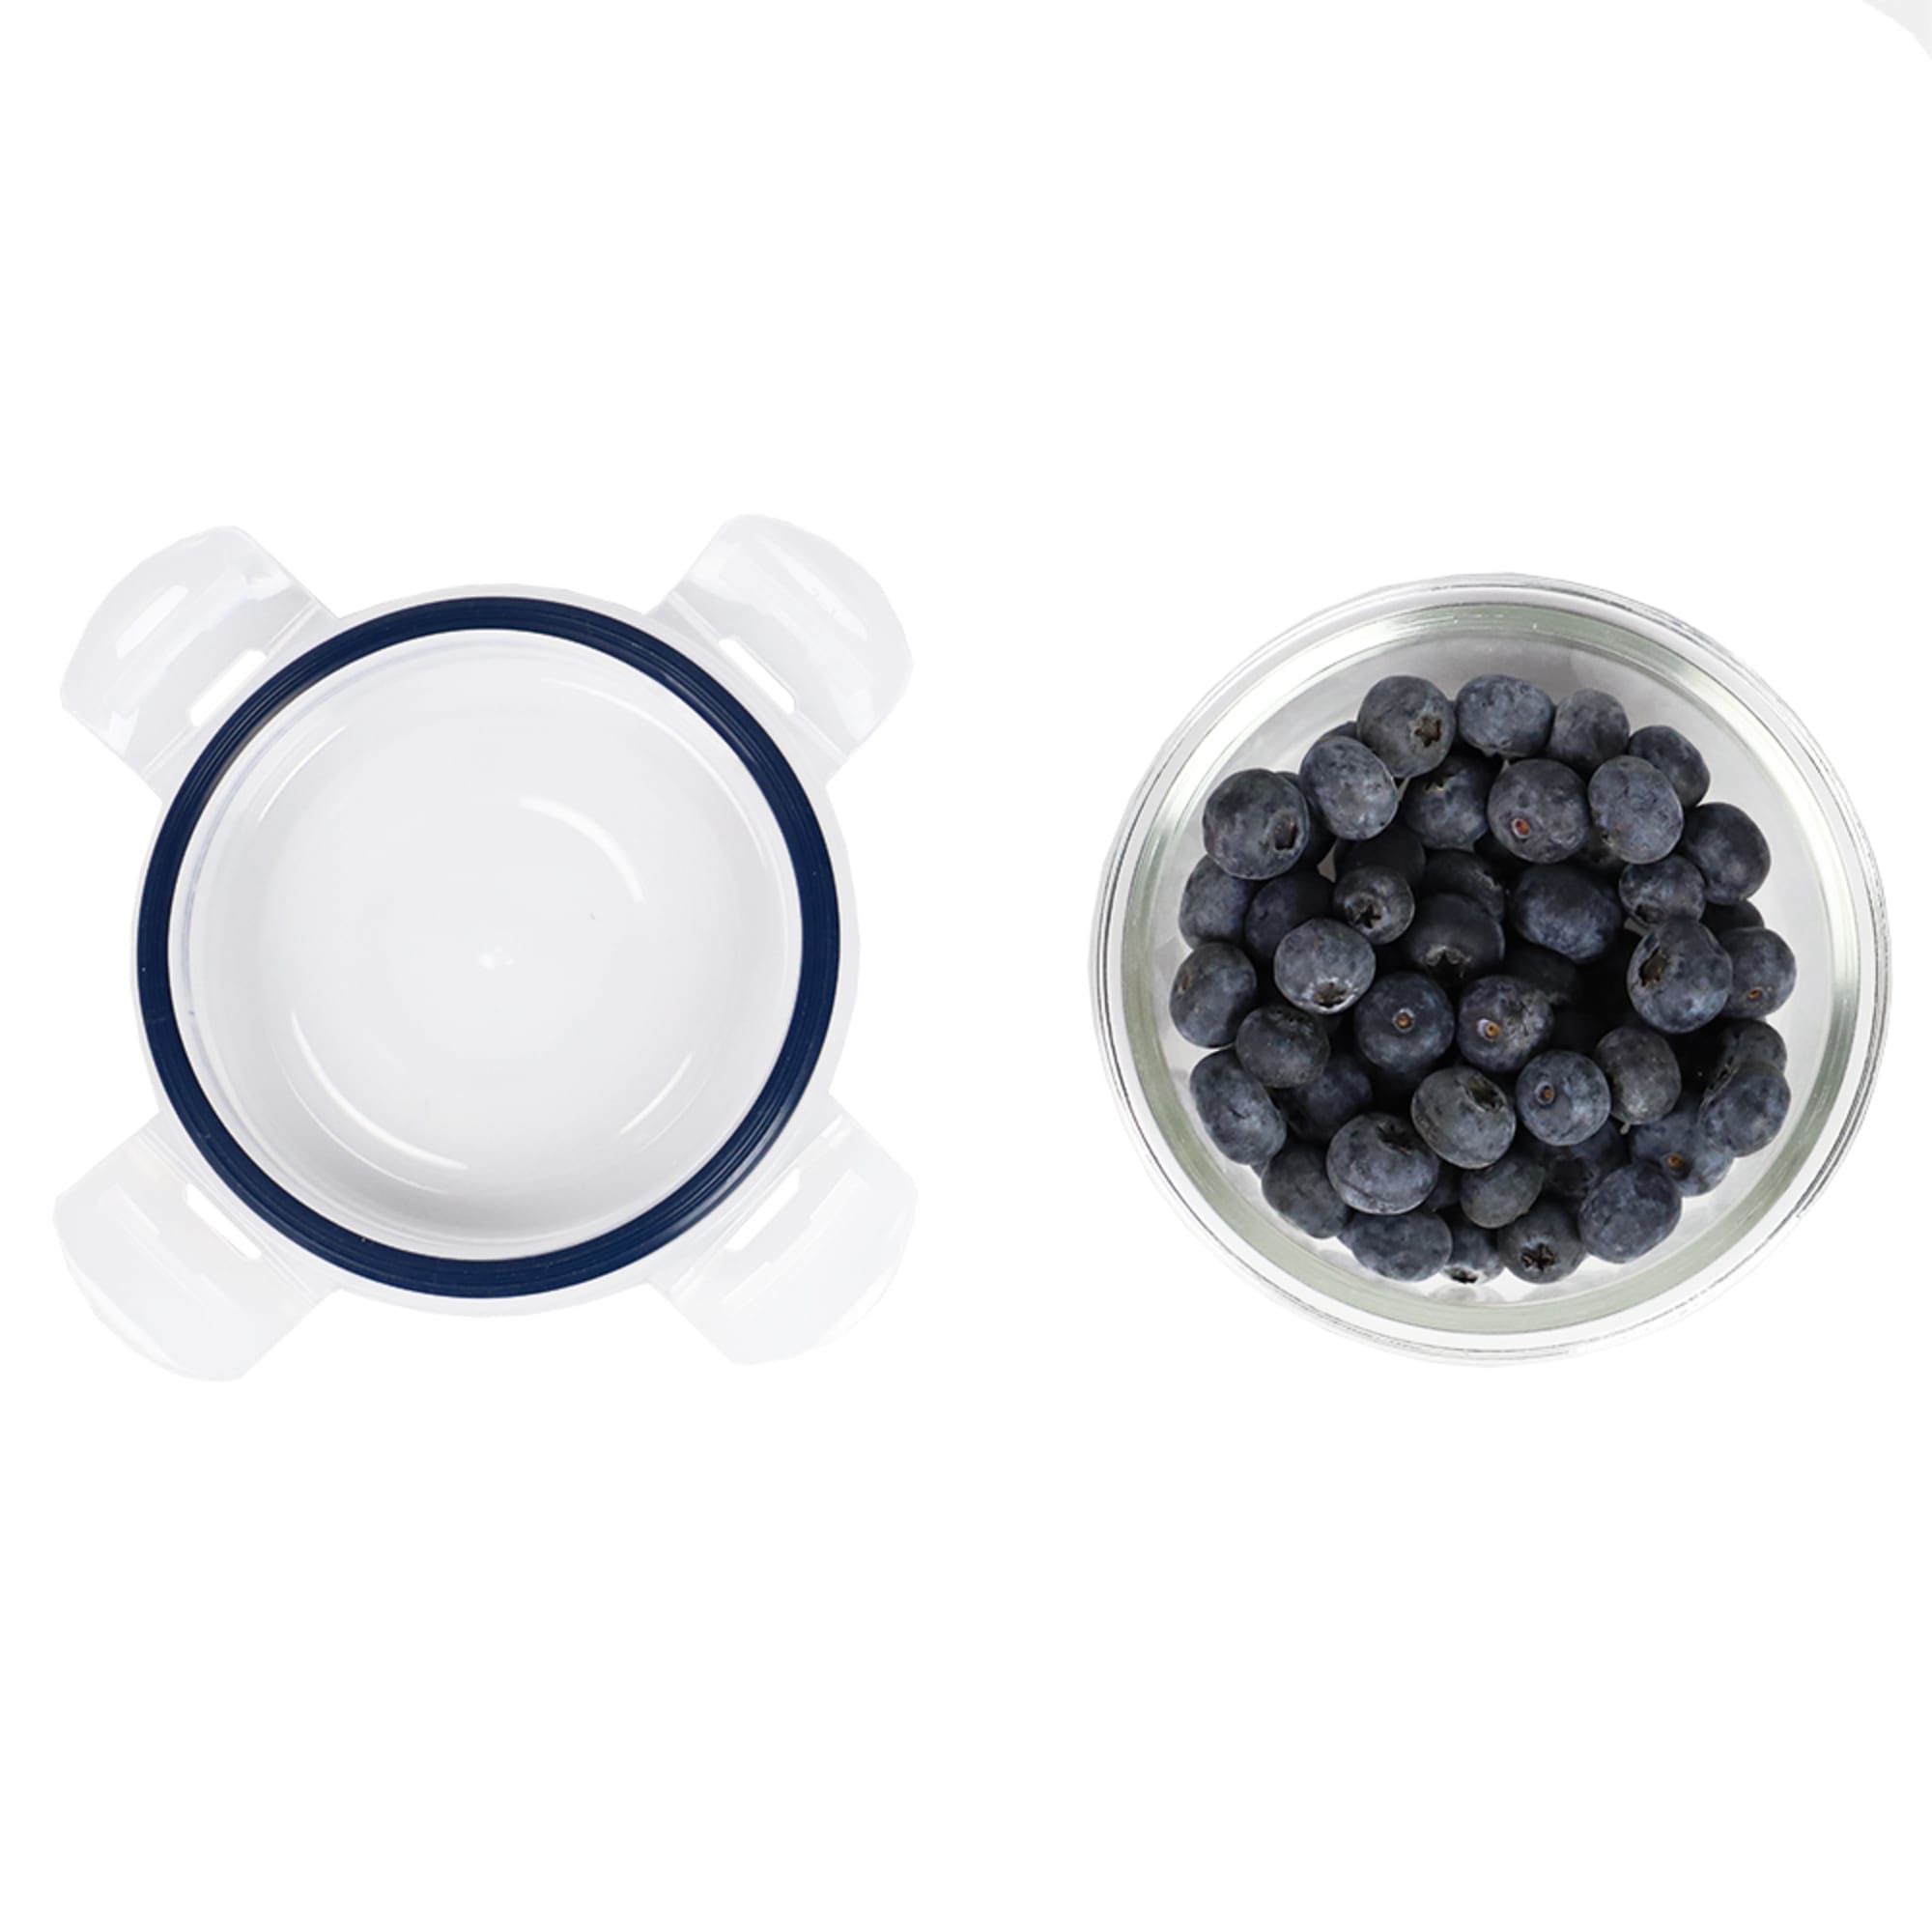 Michael Graves Design 13 Ounce High Borosilicate Glass Round Food Storage Container with Indigo Rubber Seal $3.00 EACH, CASE PACK OF 12